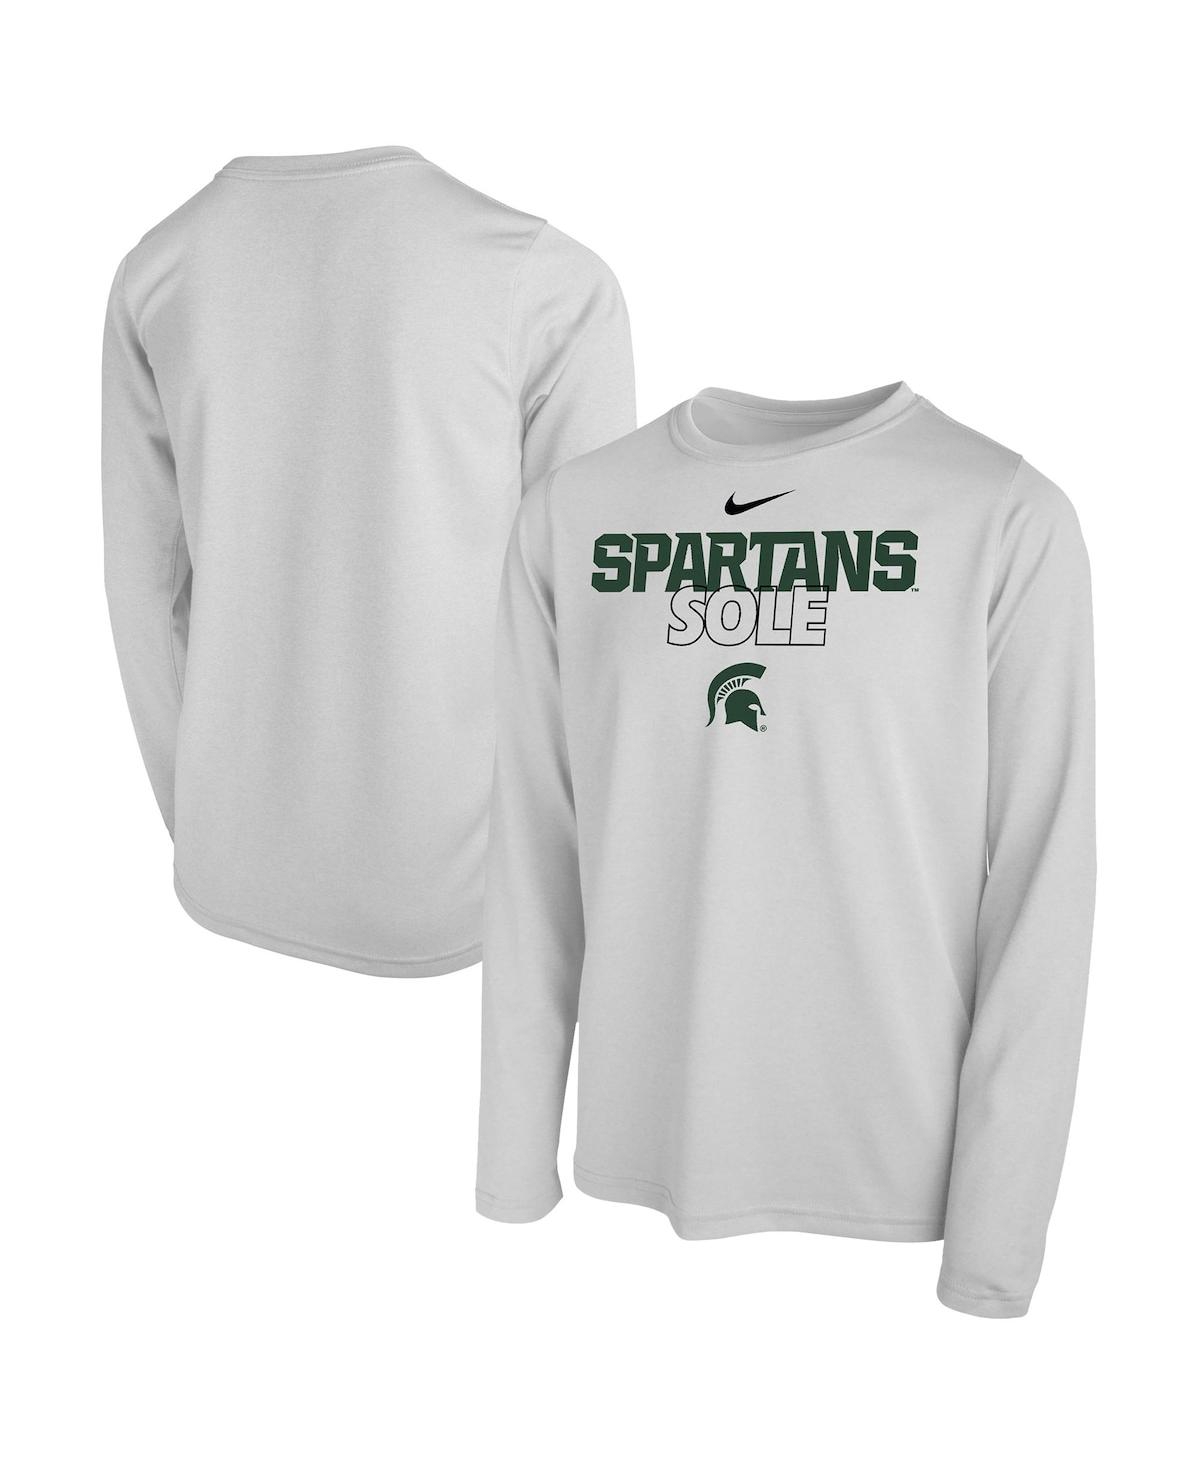 Nike Kids' Big Boys And Girls  White Michigan State Spartans Sole Bench T-shirt